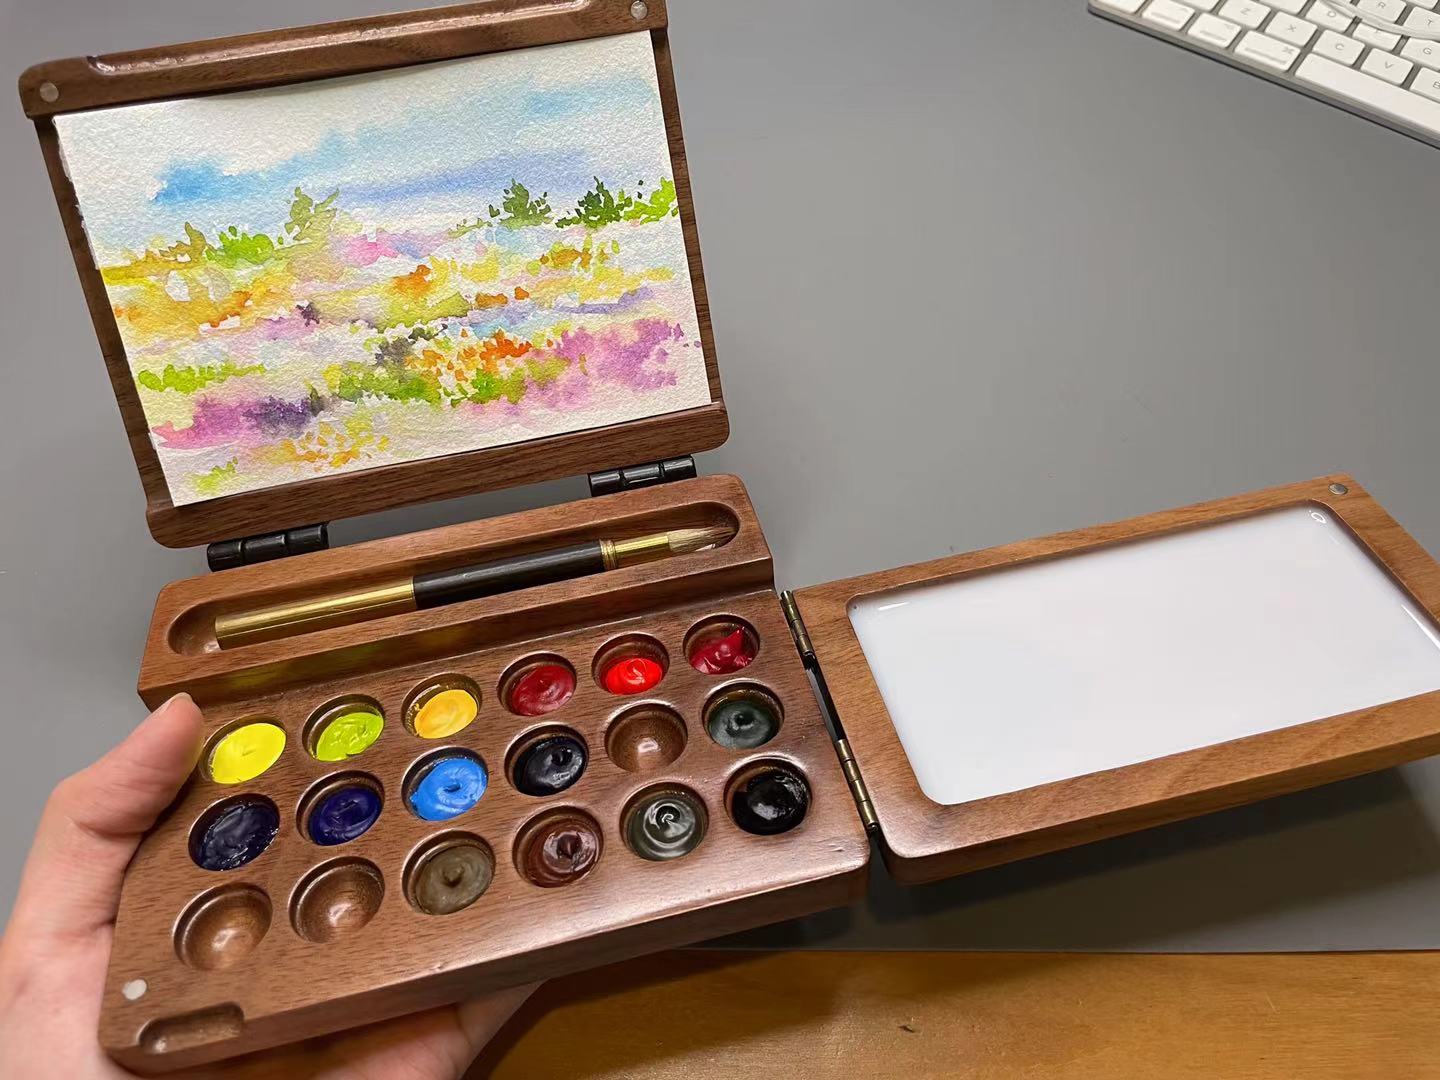 Original Handcrafted Wooden Watercolor Box with Ceramic Palette